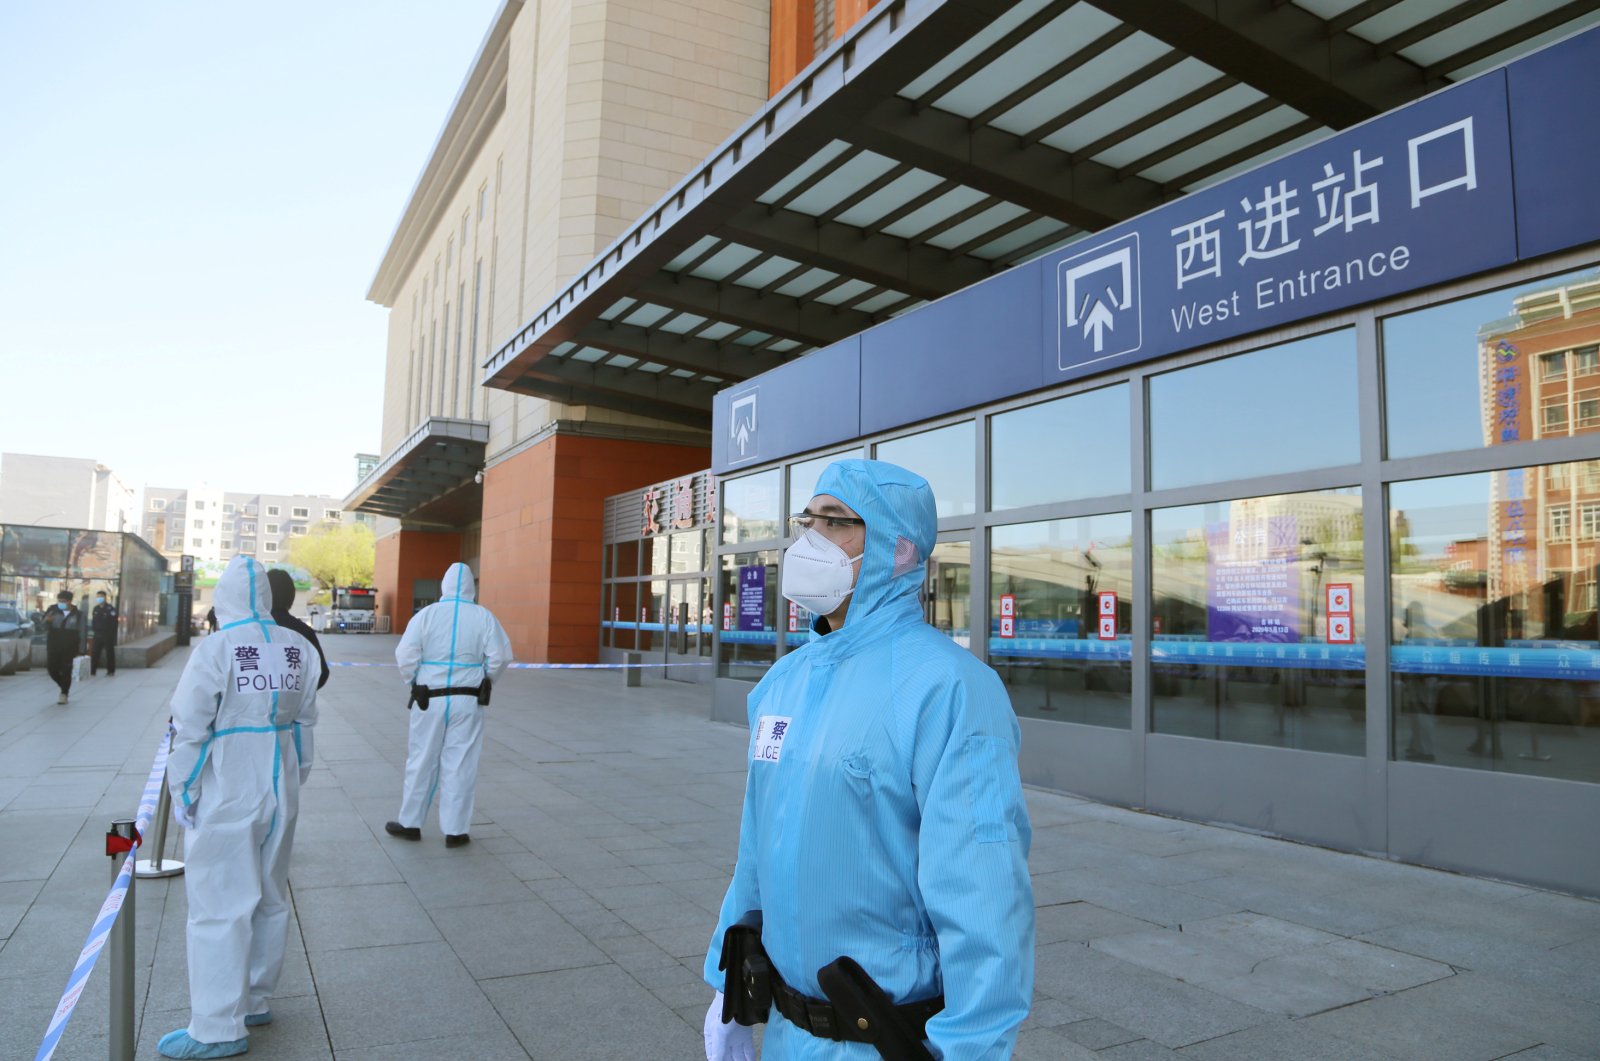 Police officers in protective suits are seen in front a closed entrance to a train station, Jilin, May 13, 2020. (REUTERS Photo)